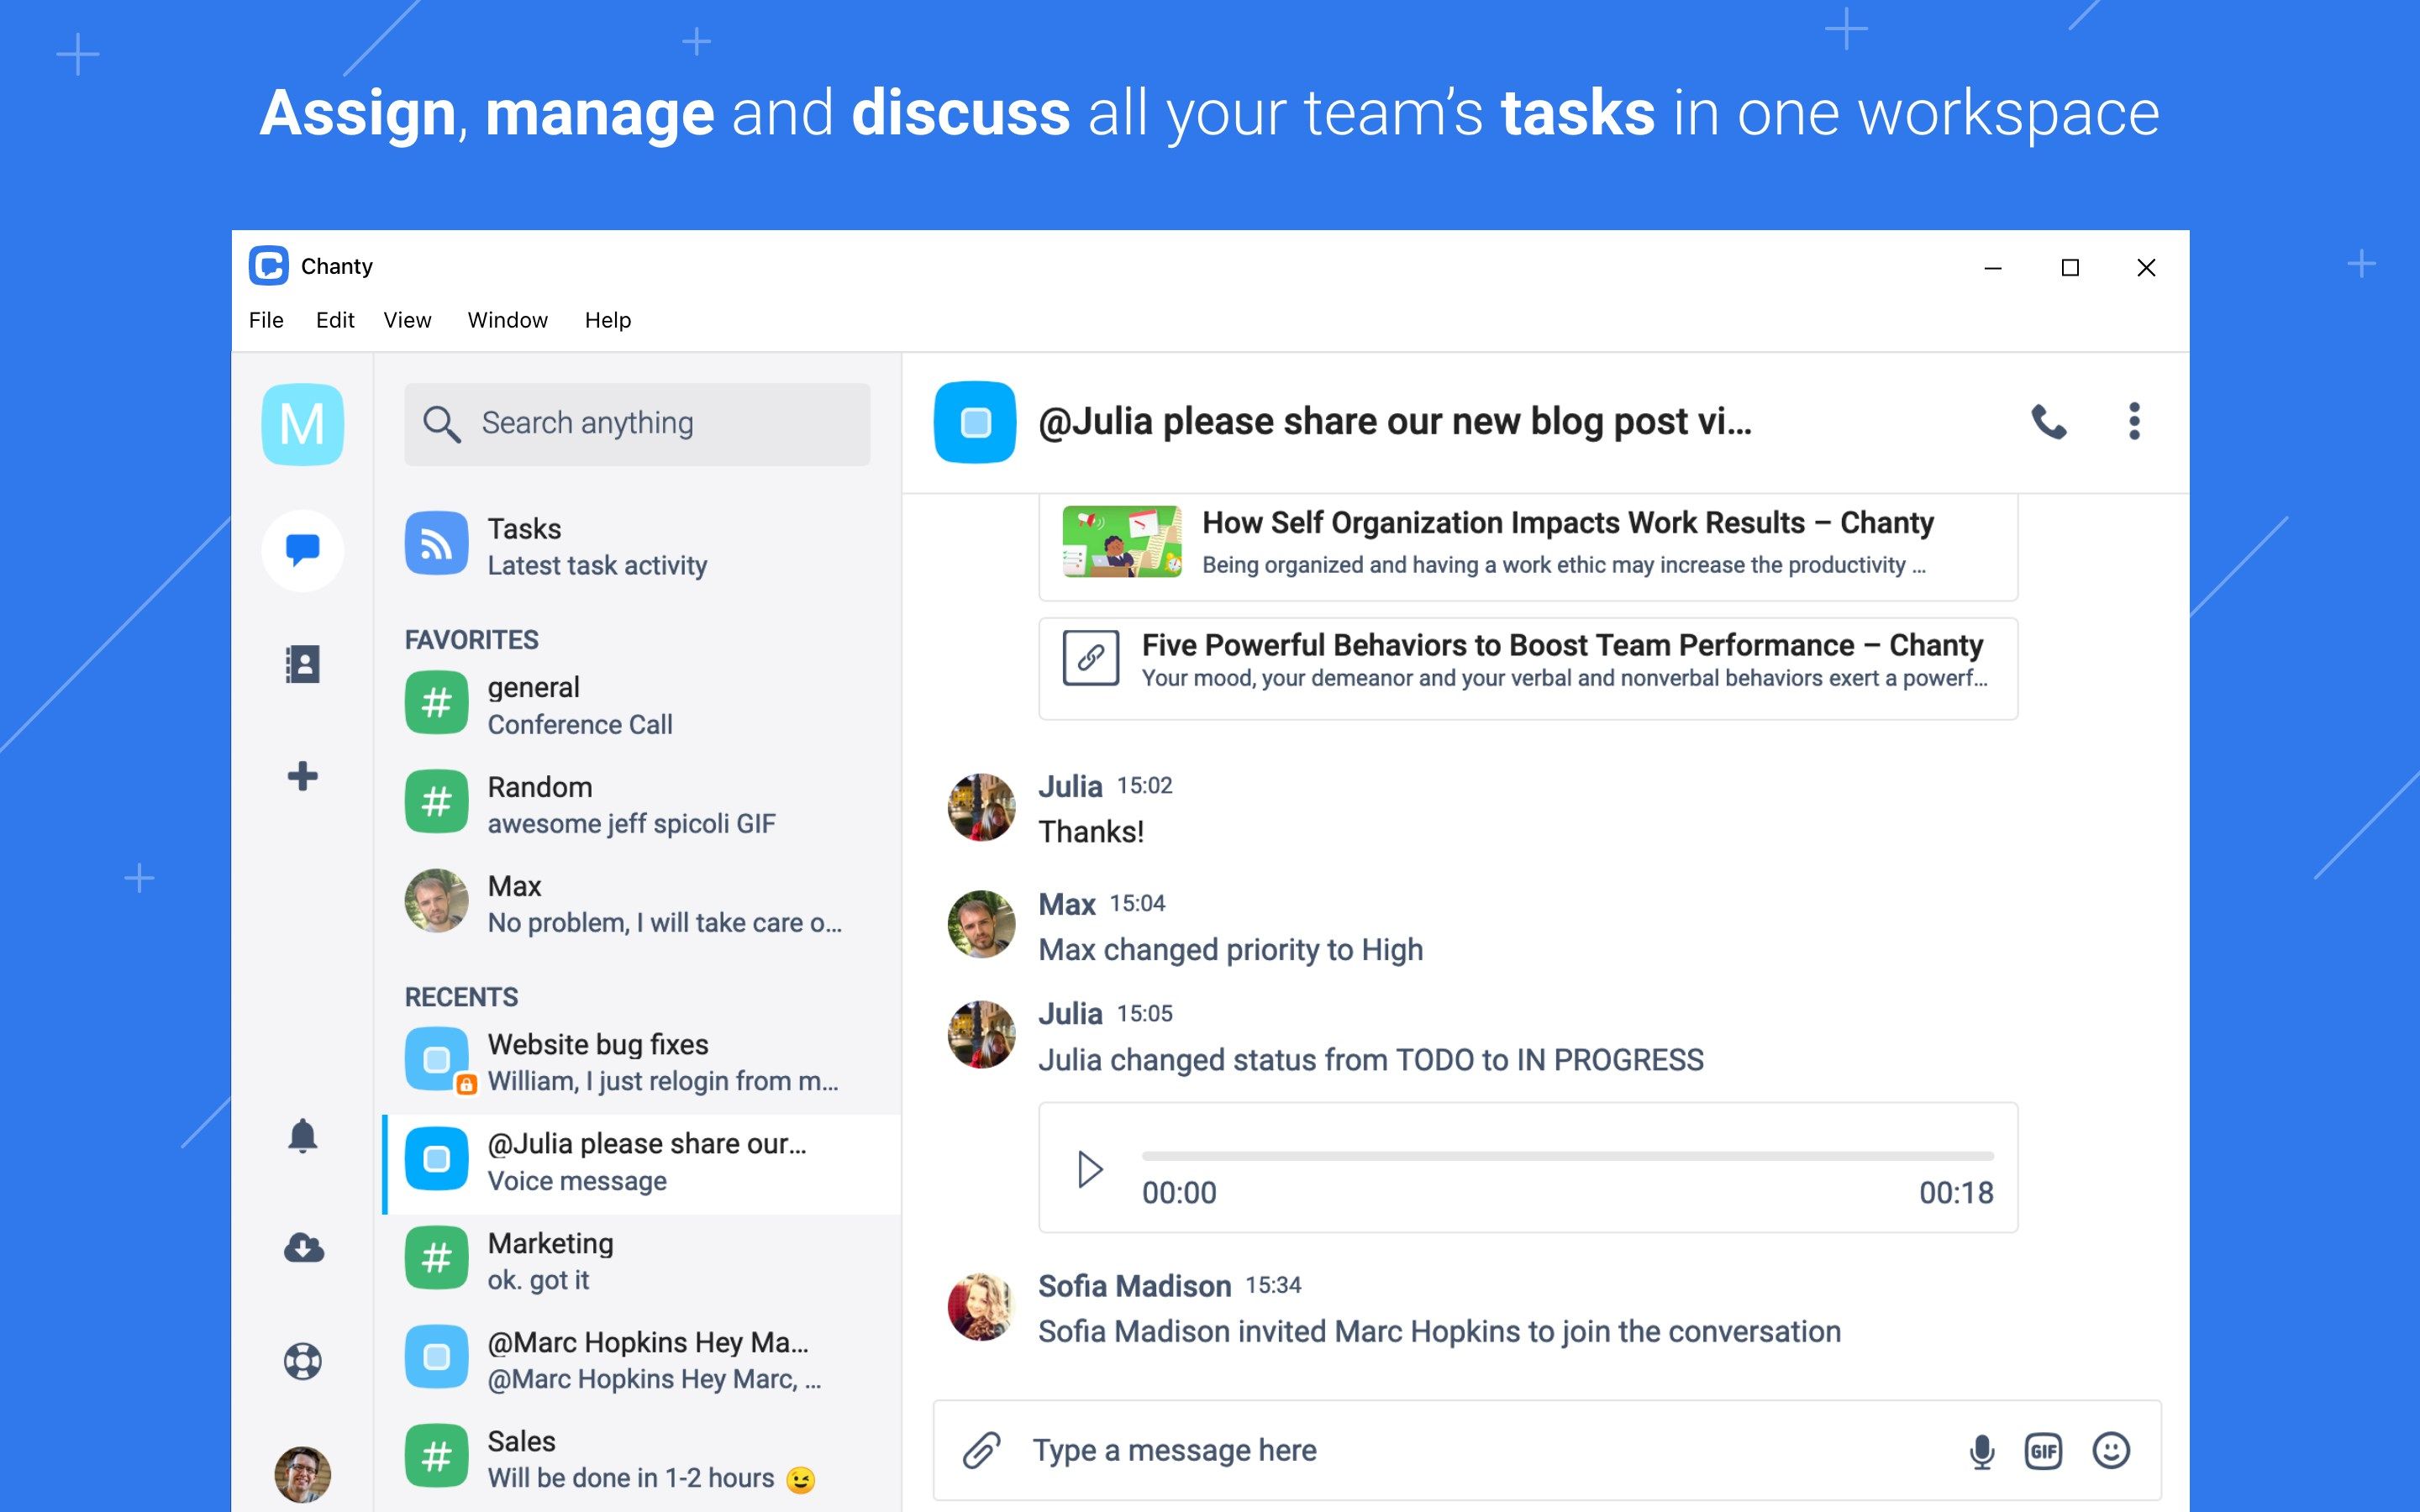 Assign, manage and discuss all your team's tasks in one workspace